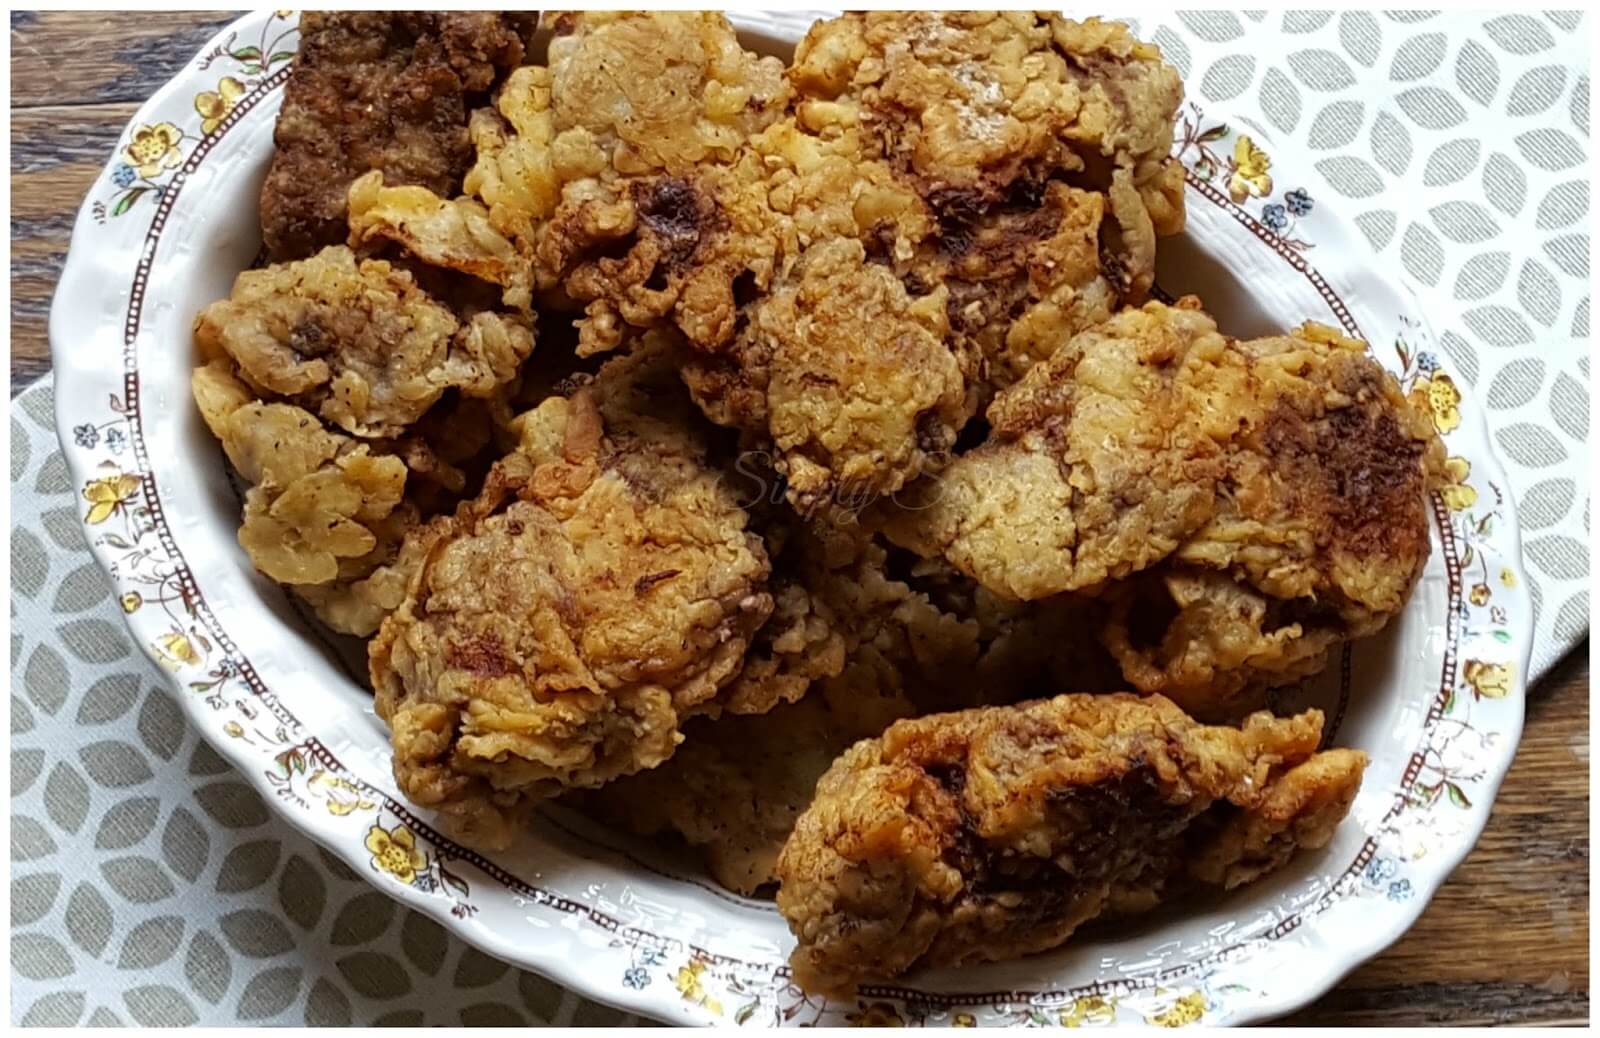 Country Chicken Livers - fried